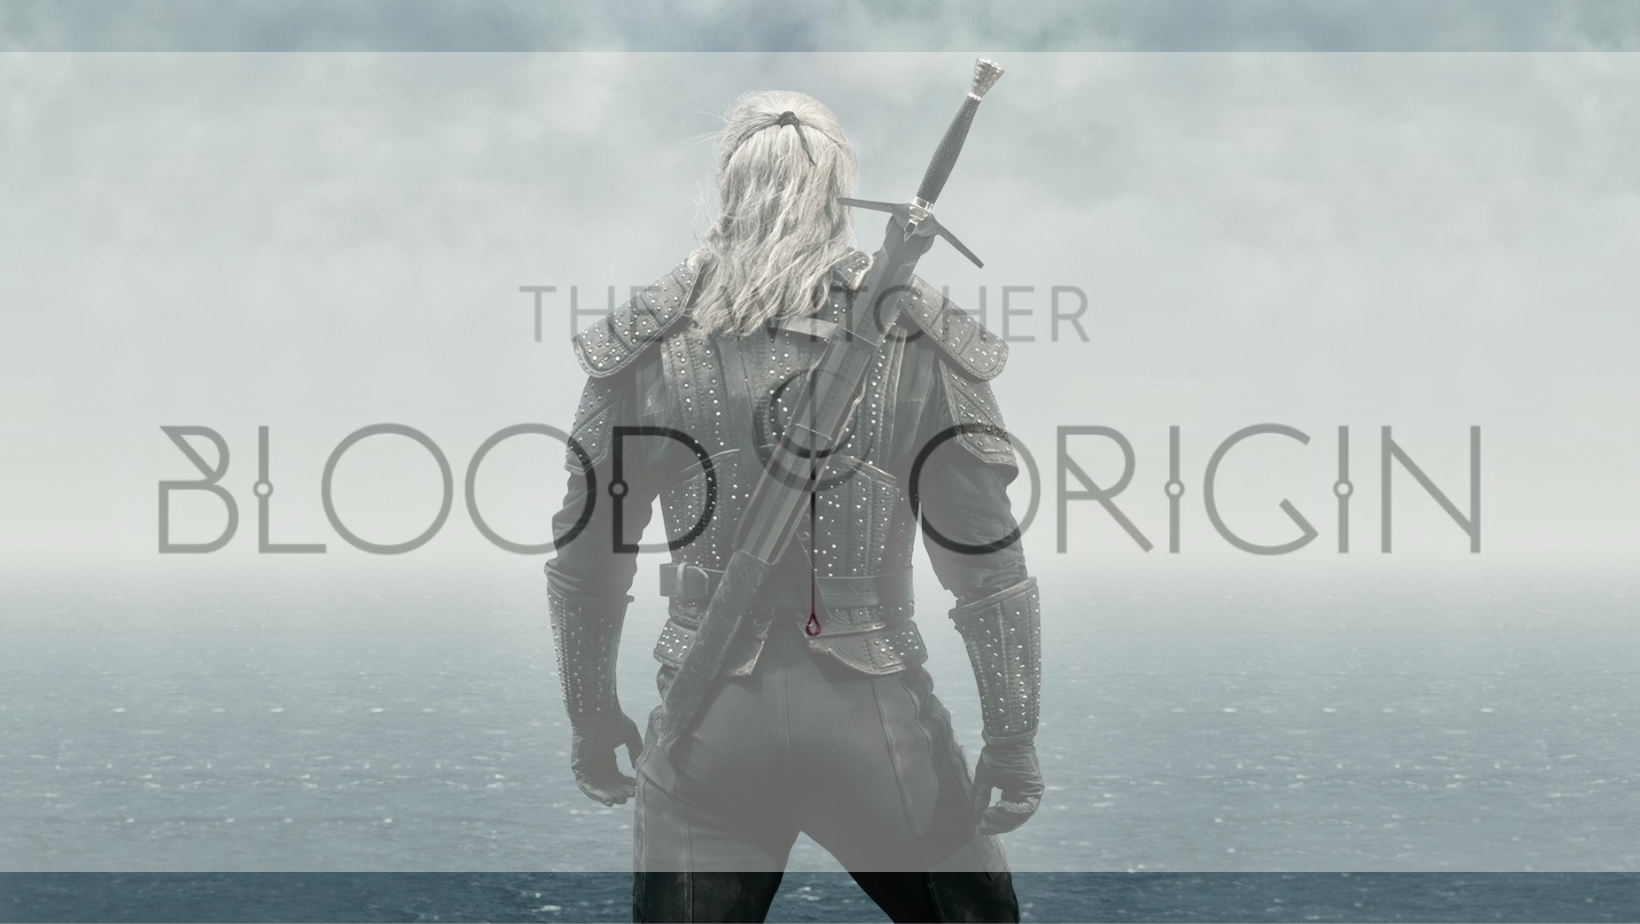 “He brought nothing but…” – The cast of The Witcher: Blood Origin discuss Henry Cavill’s departure from The Witcher world

+2023